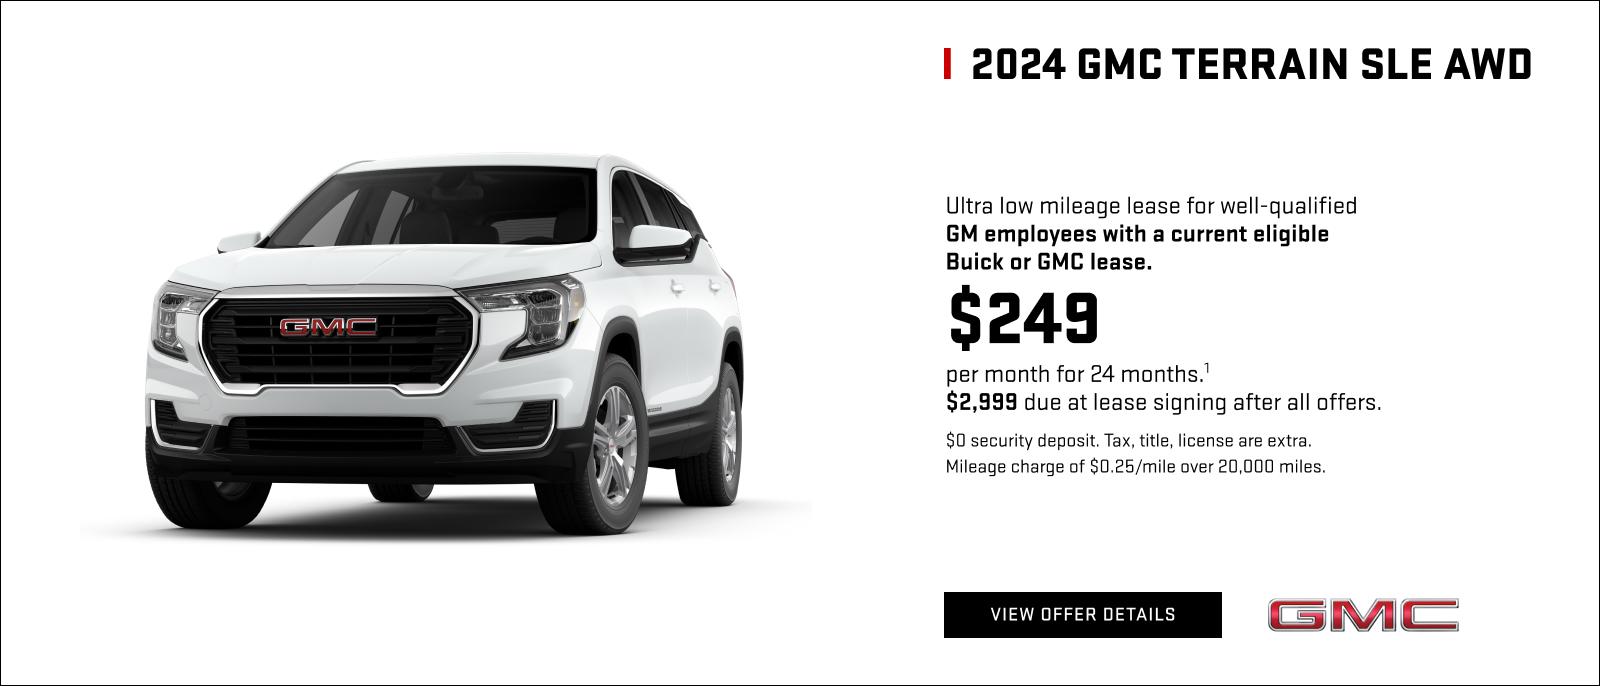 Ultra low mileage lease for well-qualified GM employees with a current eligible Buick or GMC lease.

$249 per month for 24 months.1 

$2,999 due at lease signing after all offers. 
$0 security deposit. Tax, title, license are extra. Mileage charge of $0.25/mile over 20,000 miles.